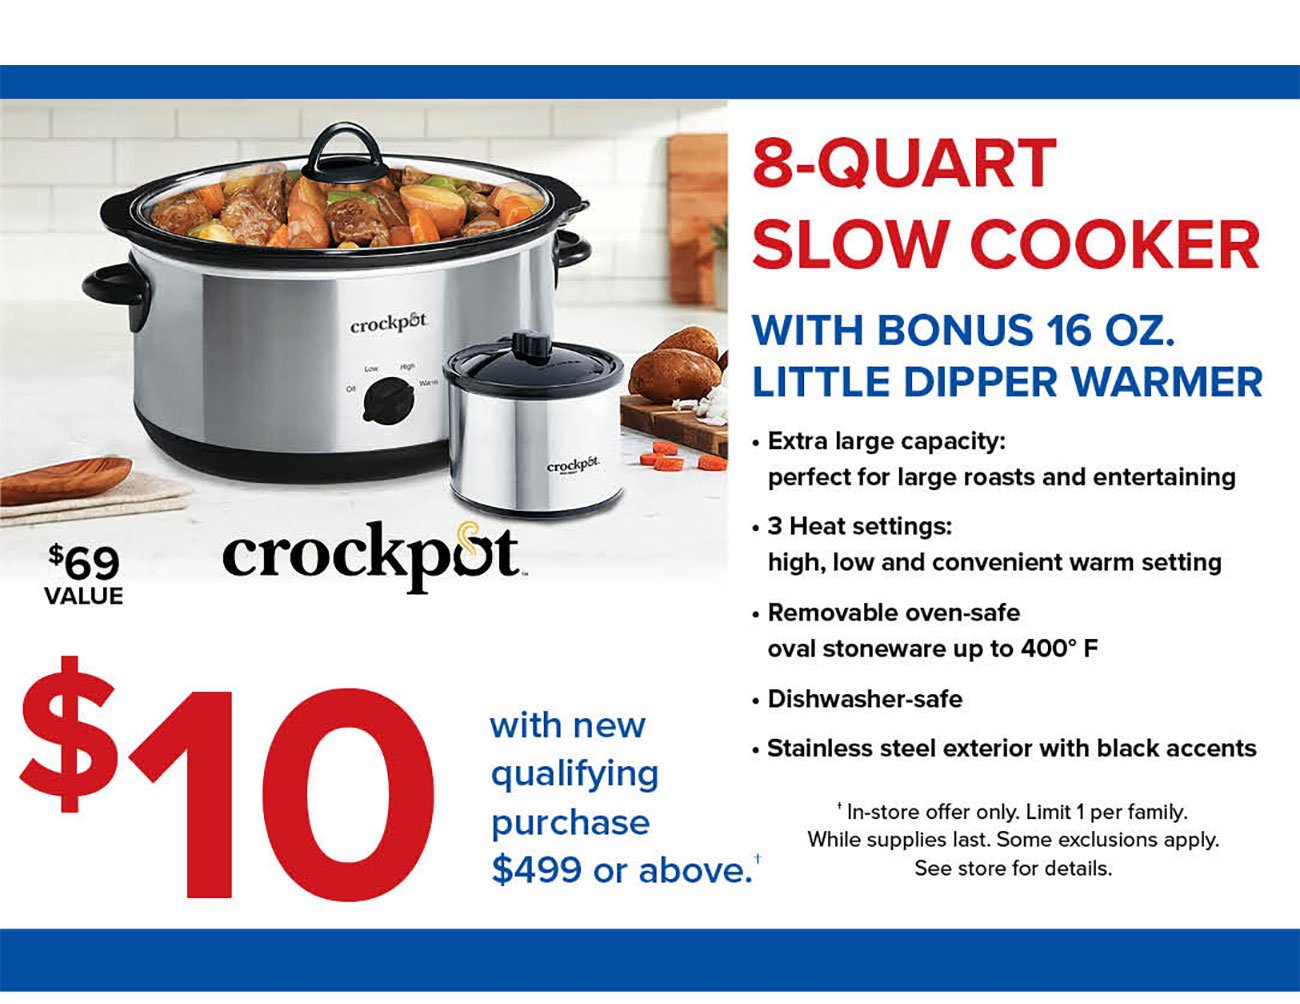 http://static.rcwilley.com/email/9139/Crockpot-Slow-Cooker-Premium.jpg